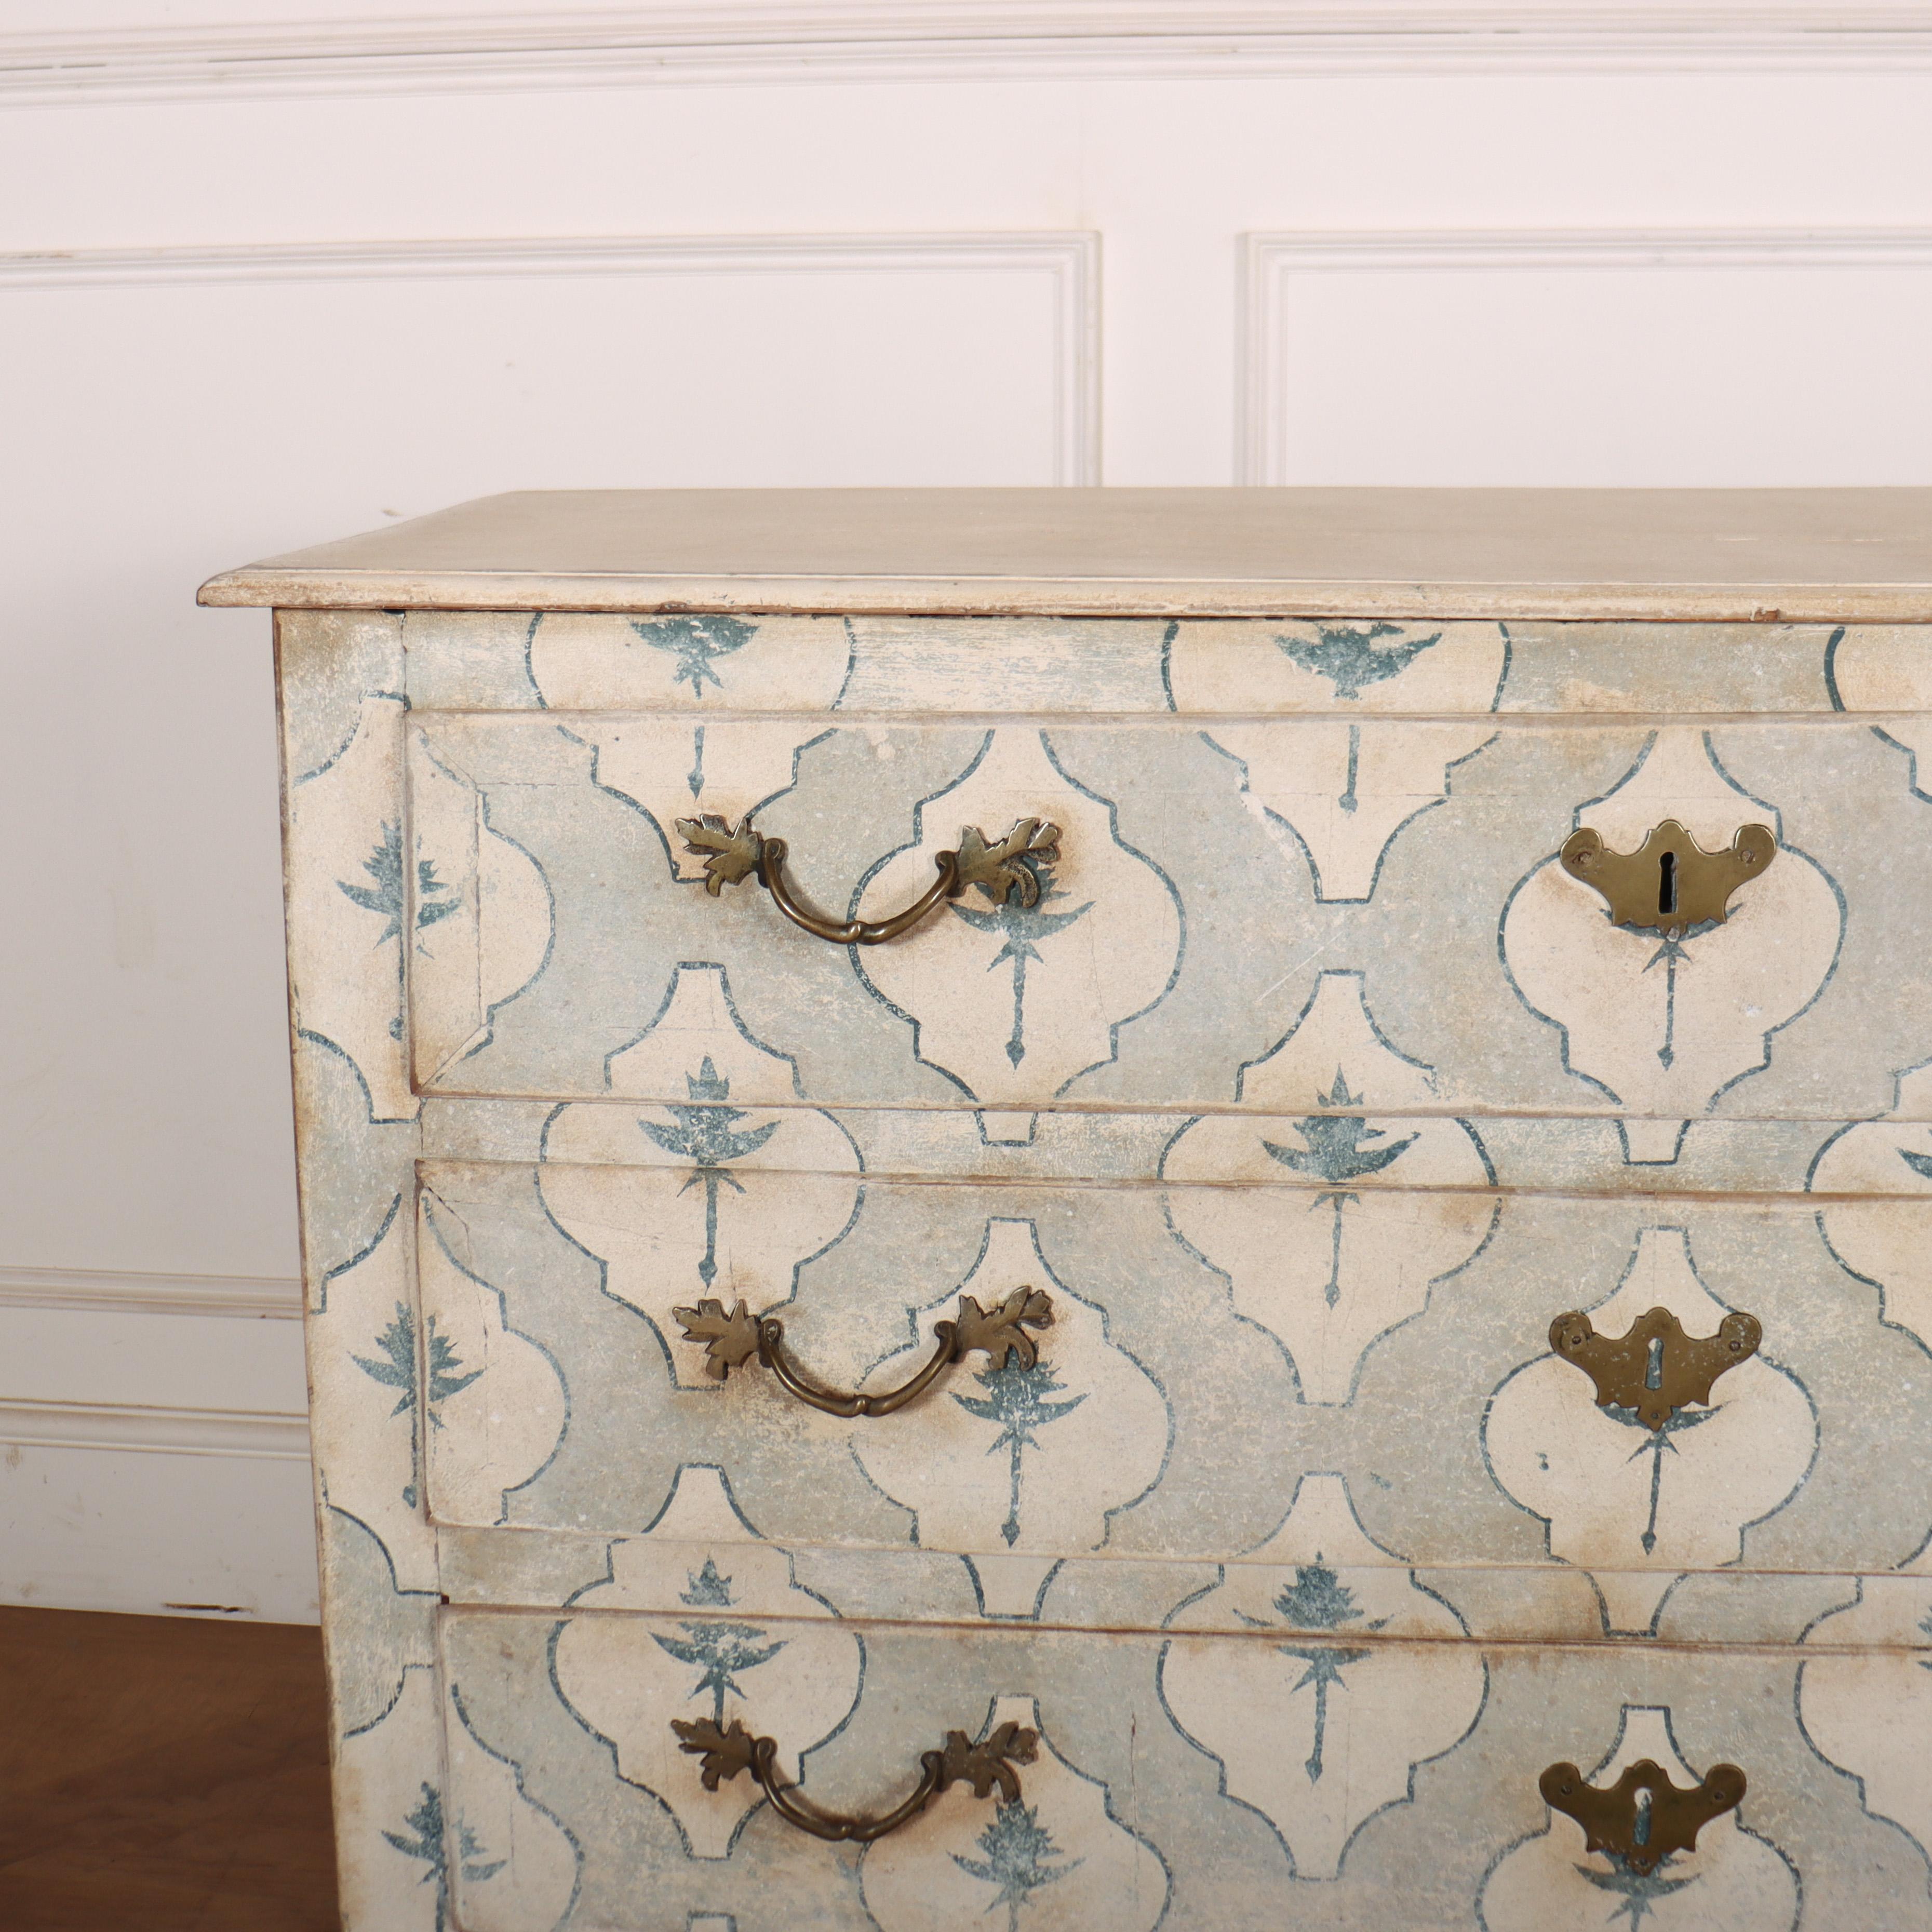 Good decorated 18th C Italian three drawer painted pine commode. 1790.

Reference: 8389

Dimensions
46.5 inches (118 cms) Wide
22 inches (56 cms) Deep
36 inches (91 cms) High